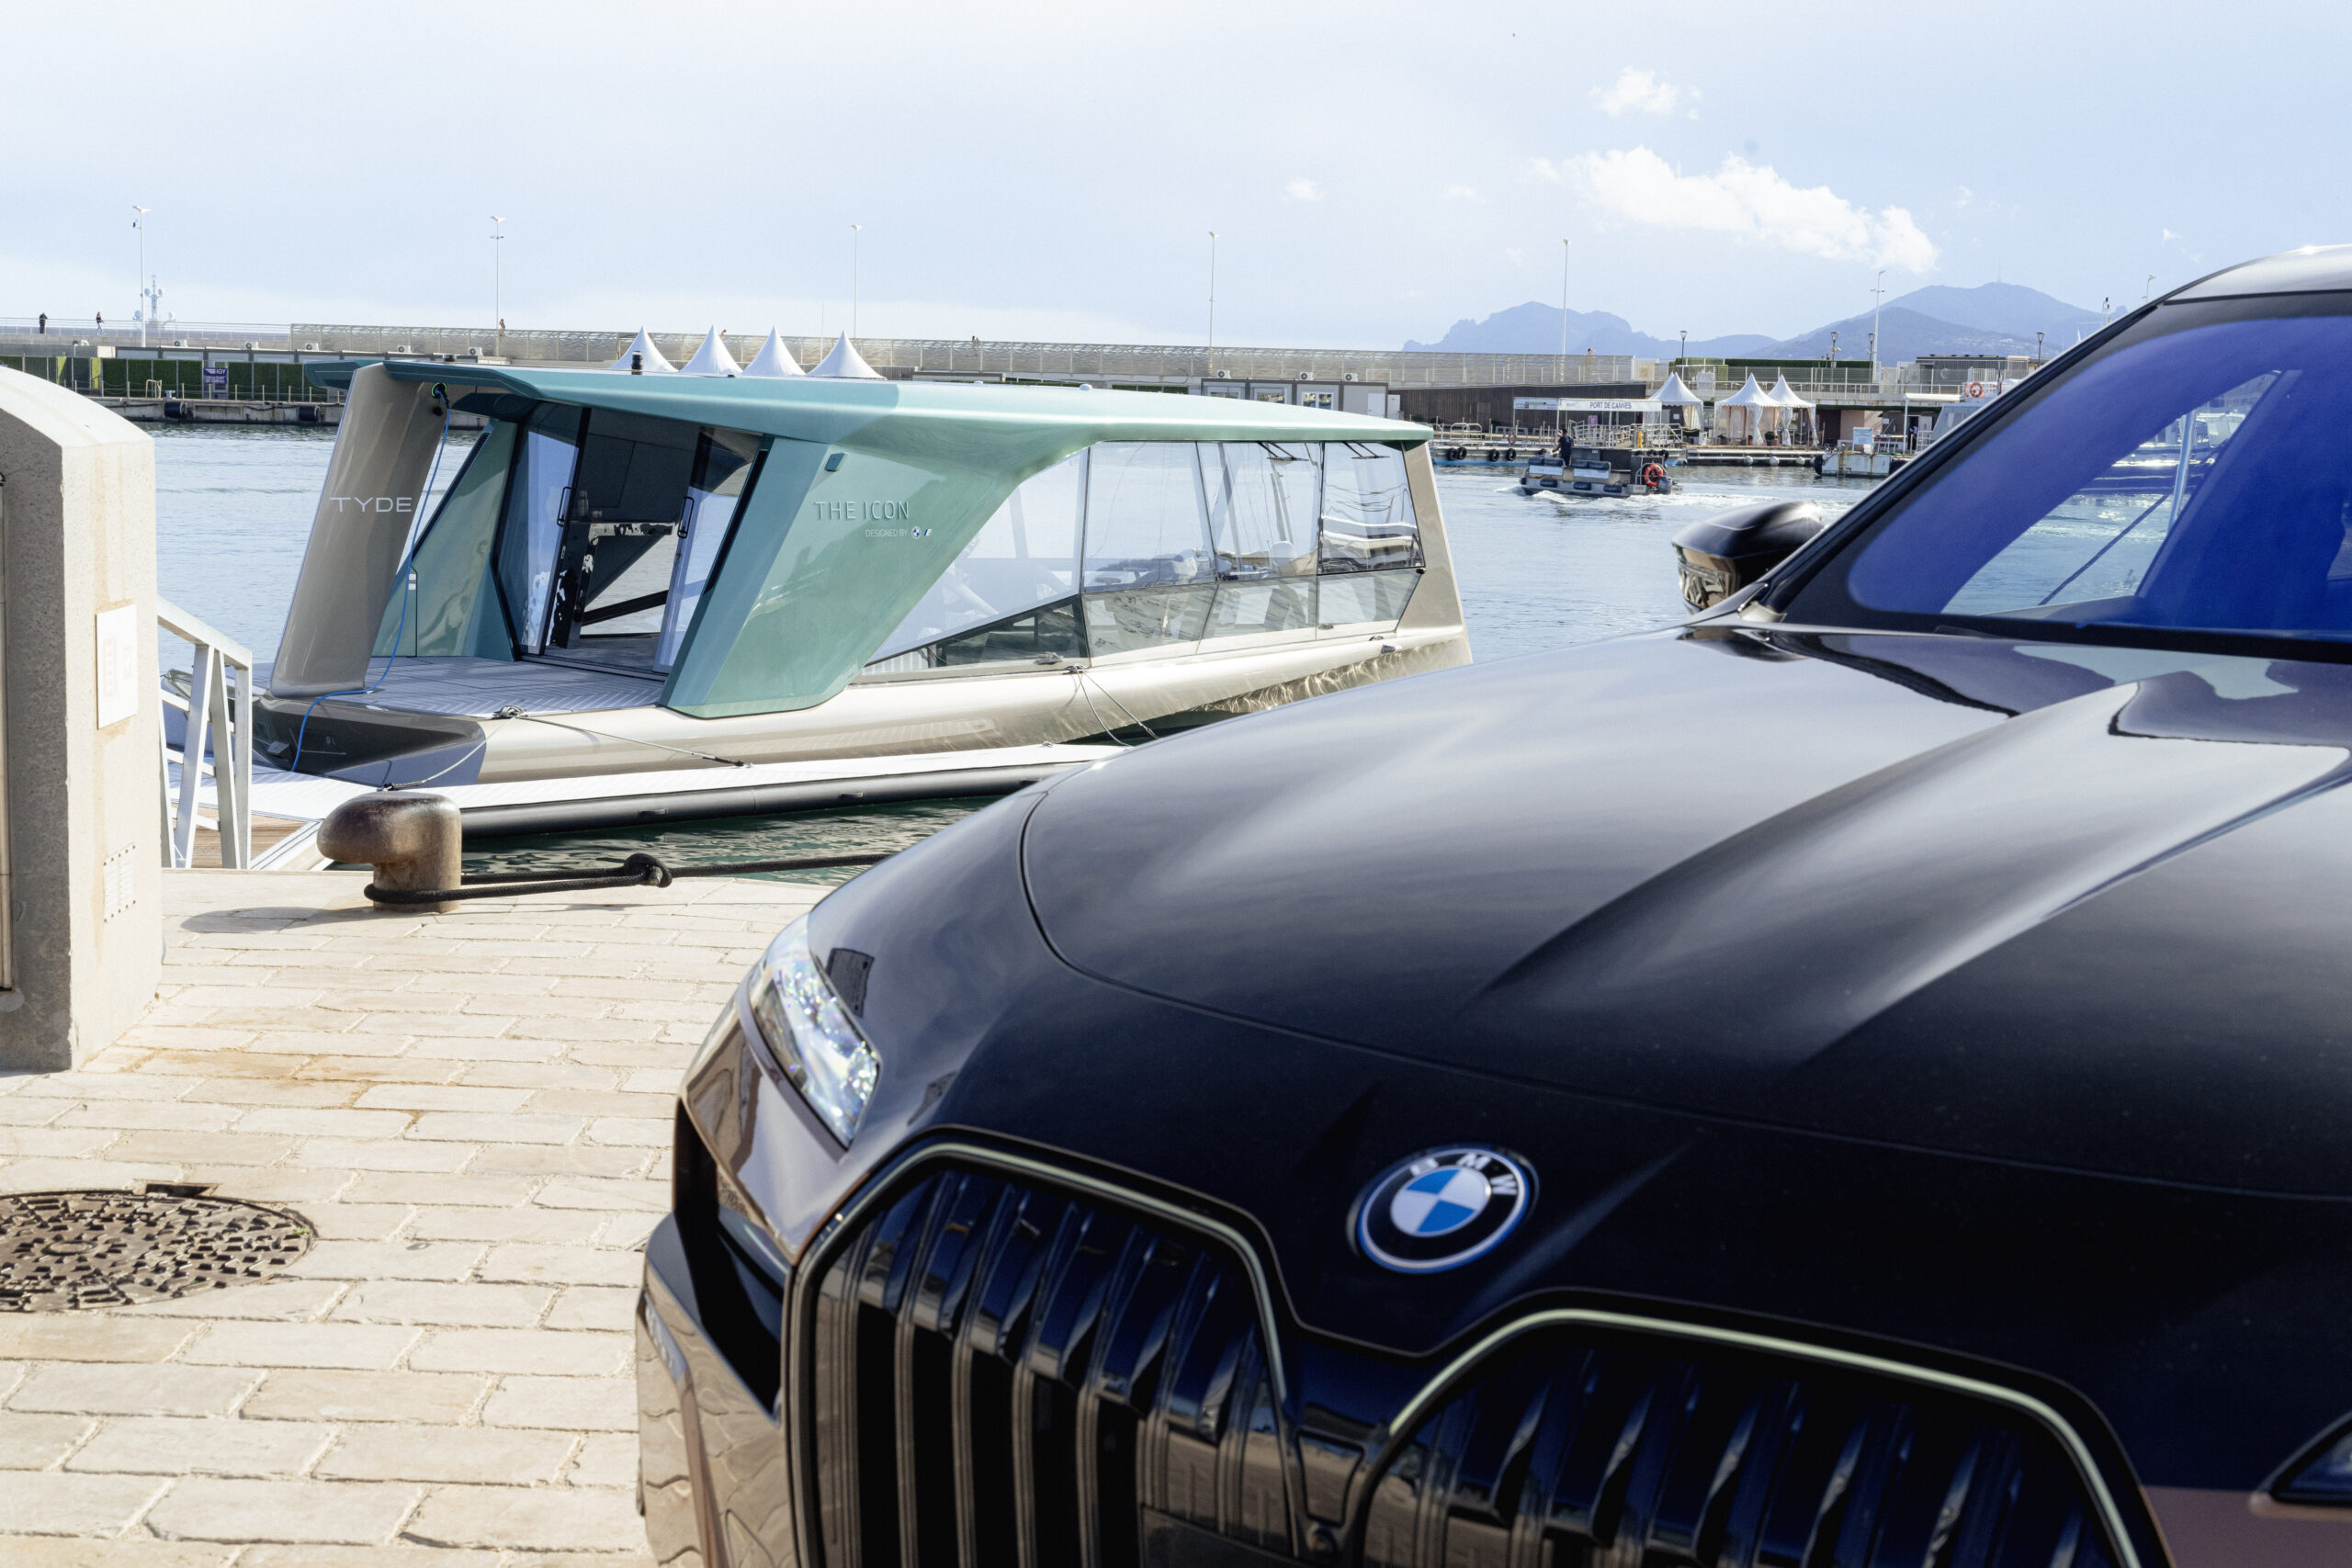 BMW And Tyde Flagship Mobility On Water - The Sustainable Yacht - ICON (3)